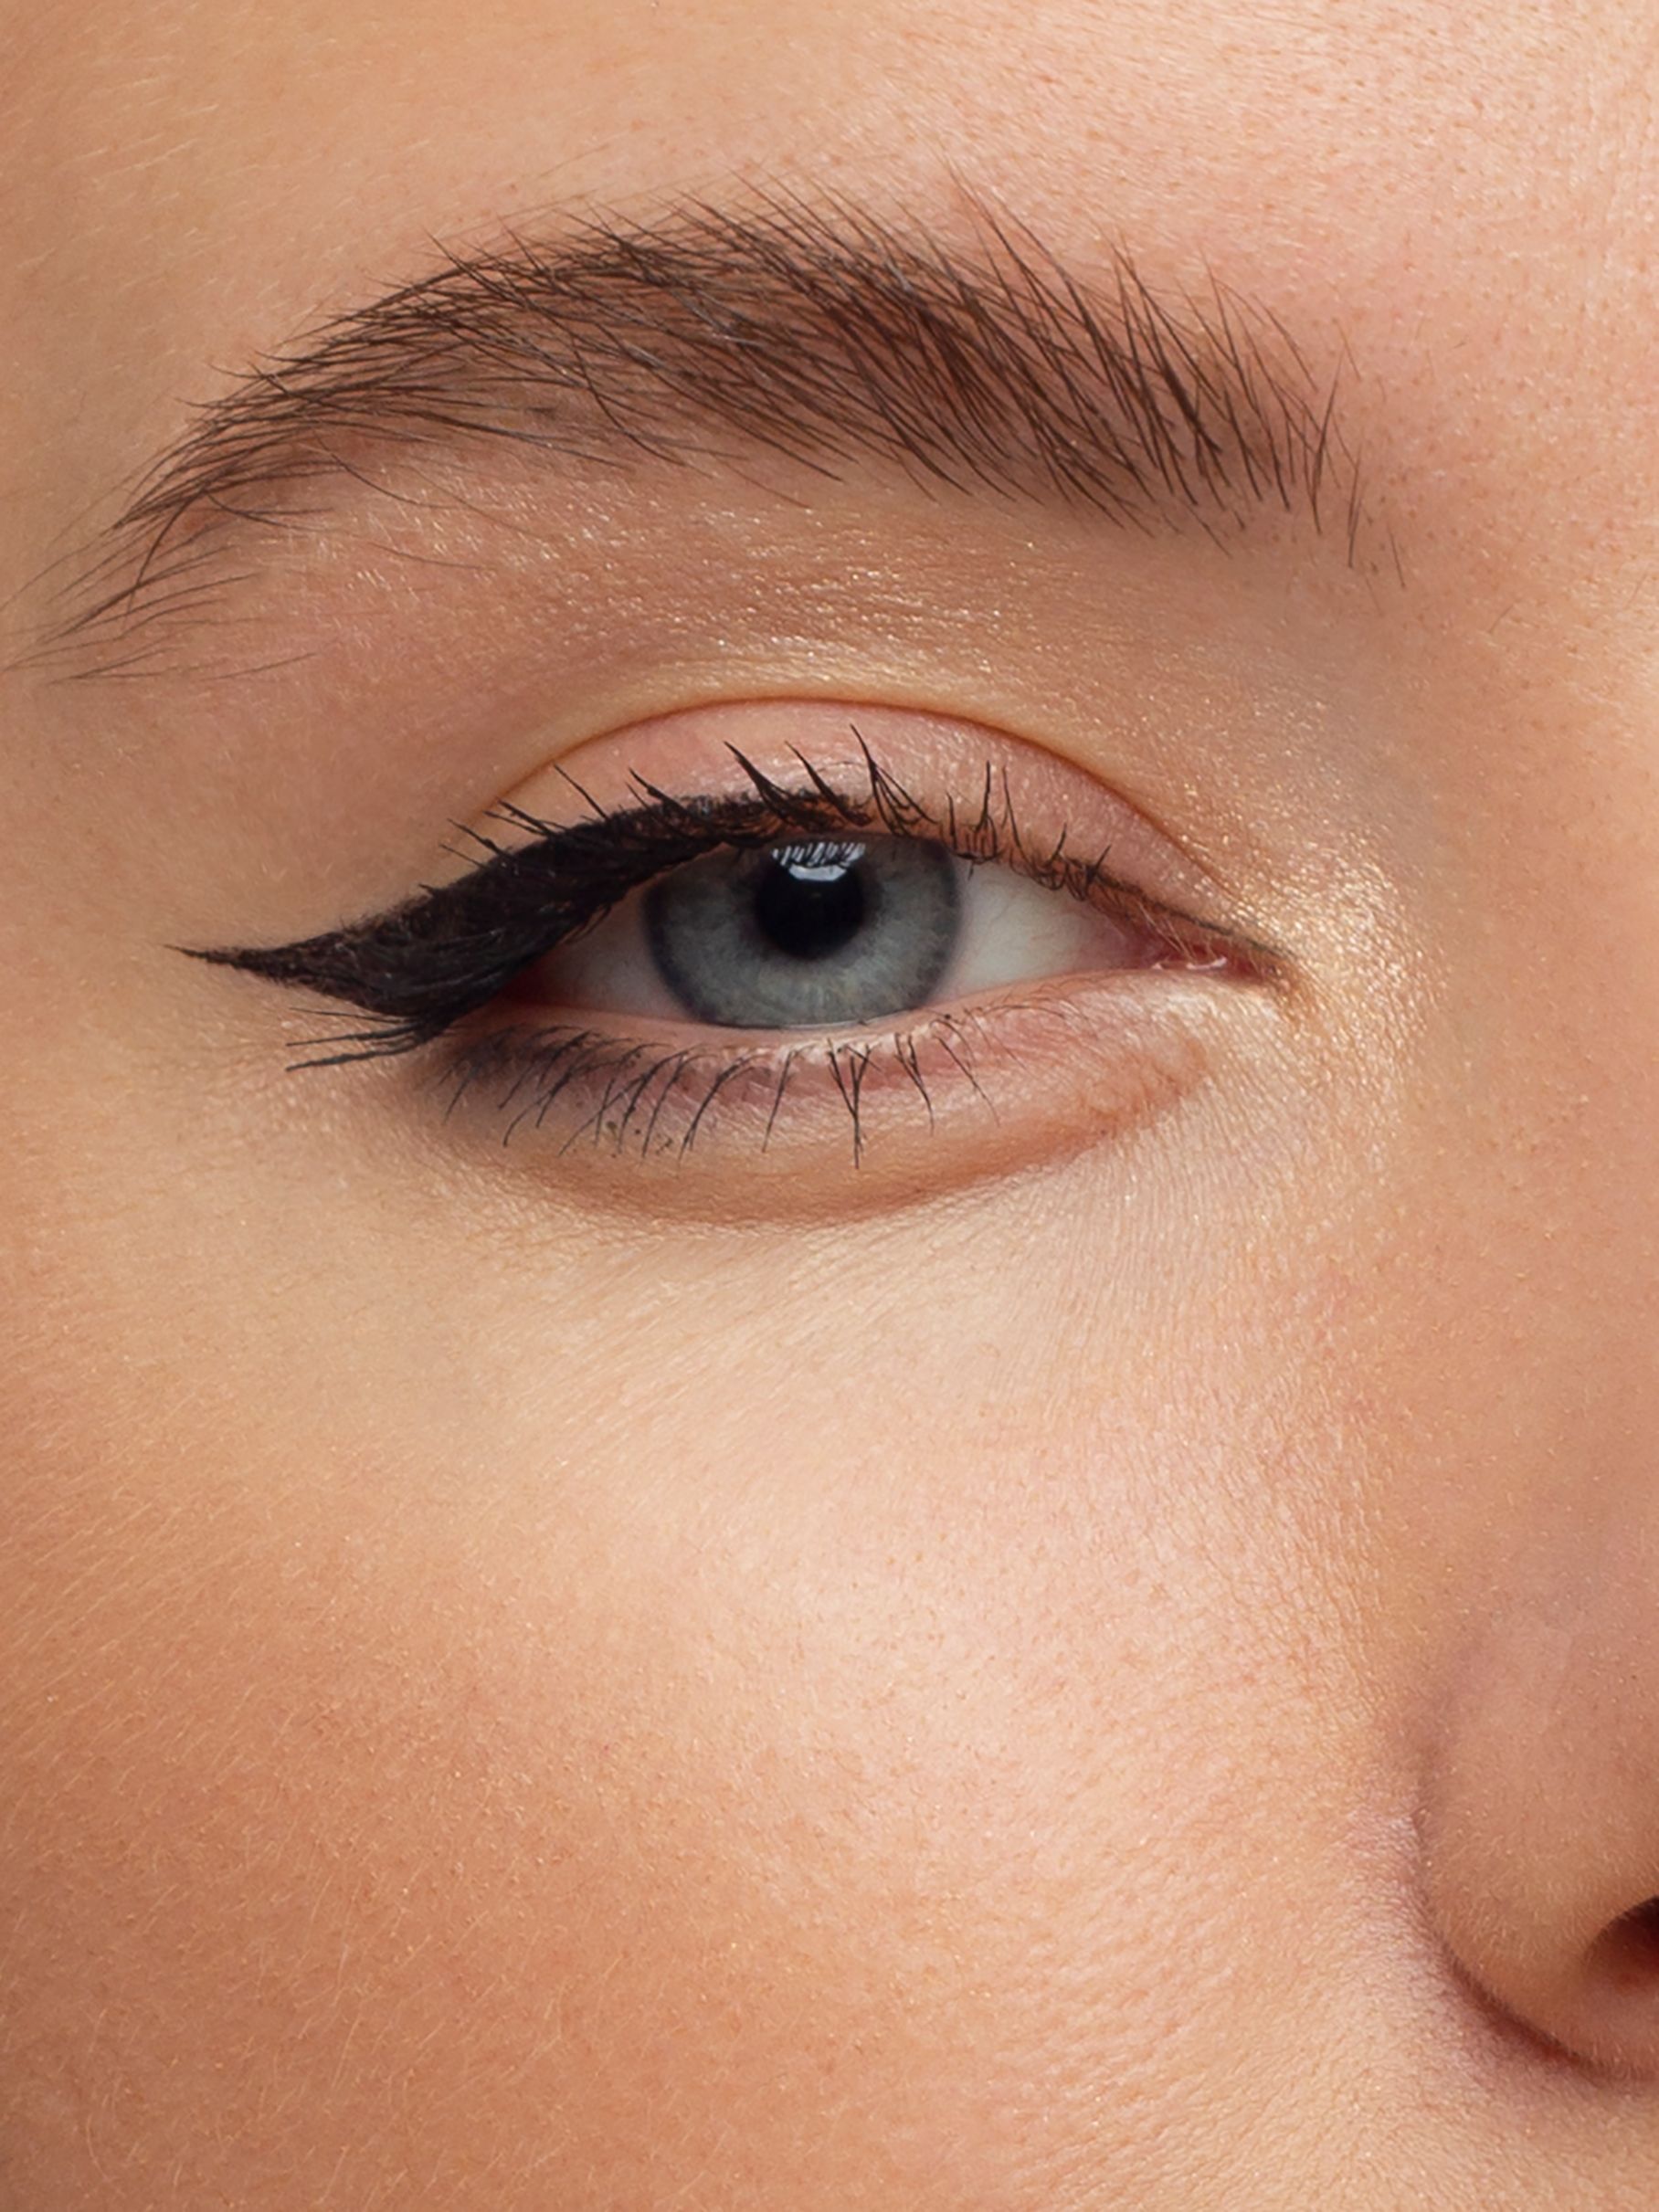 A close up of a woman 's eye with eyeliner.